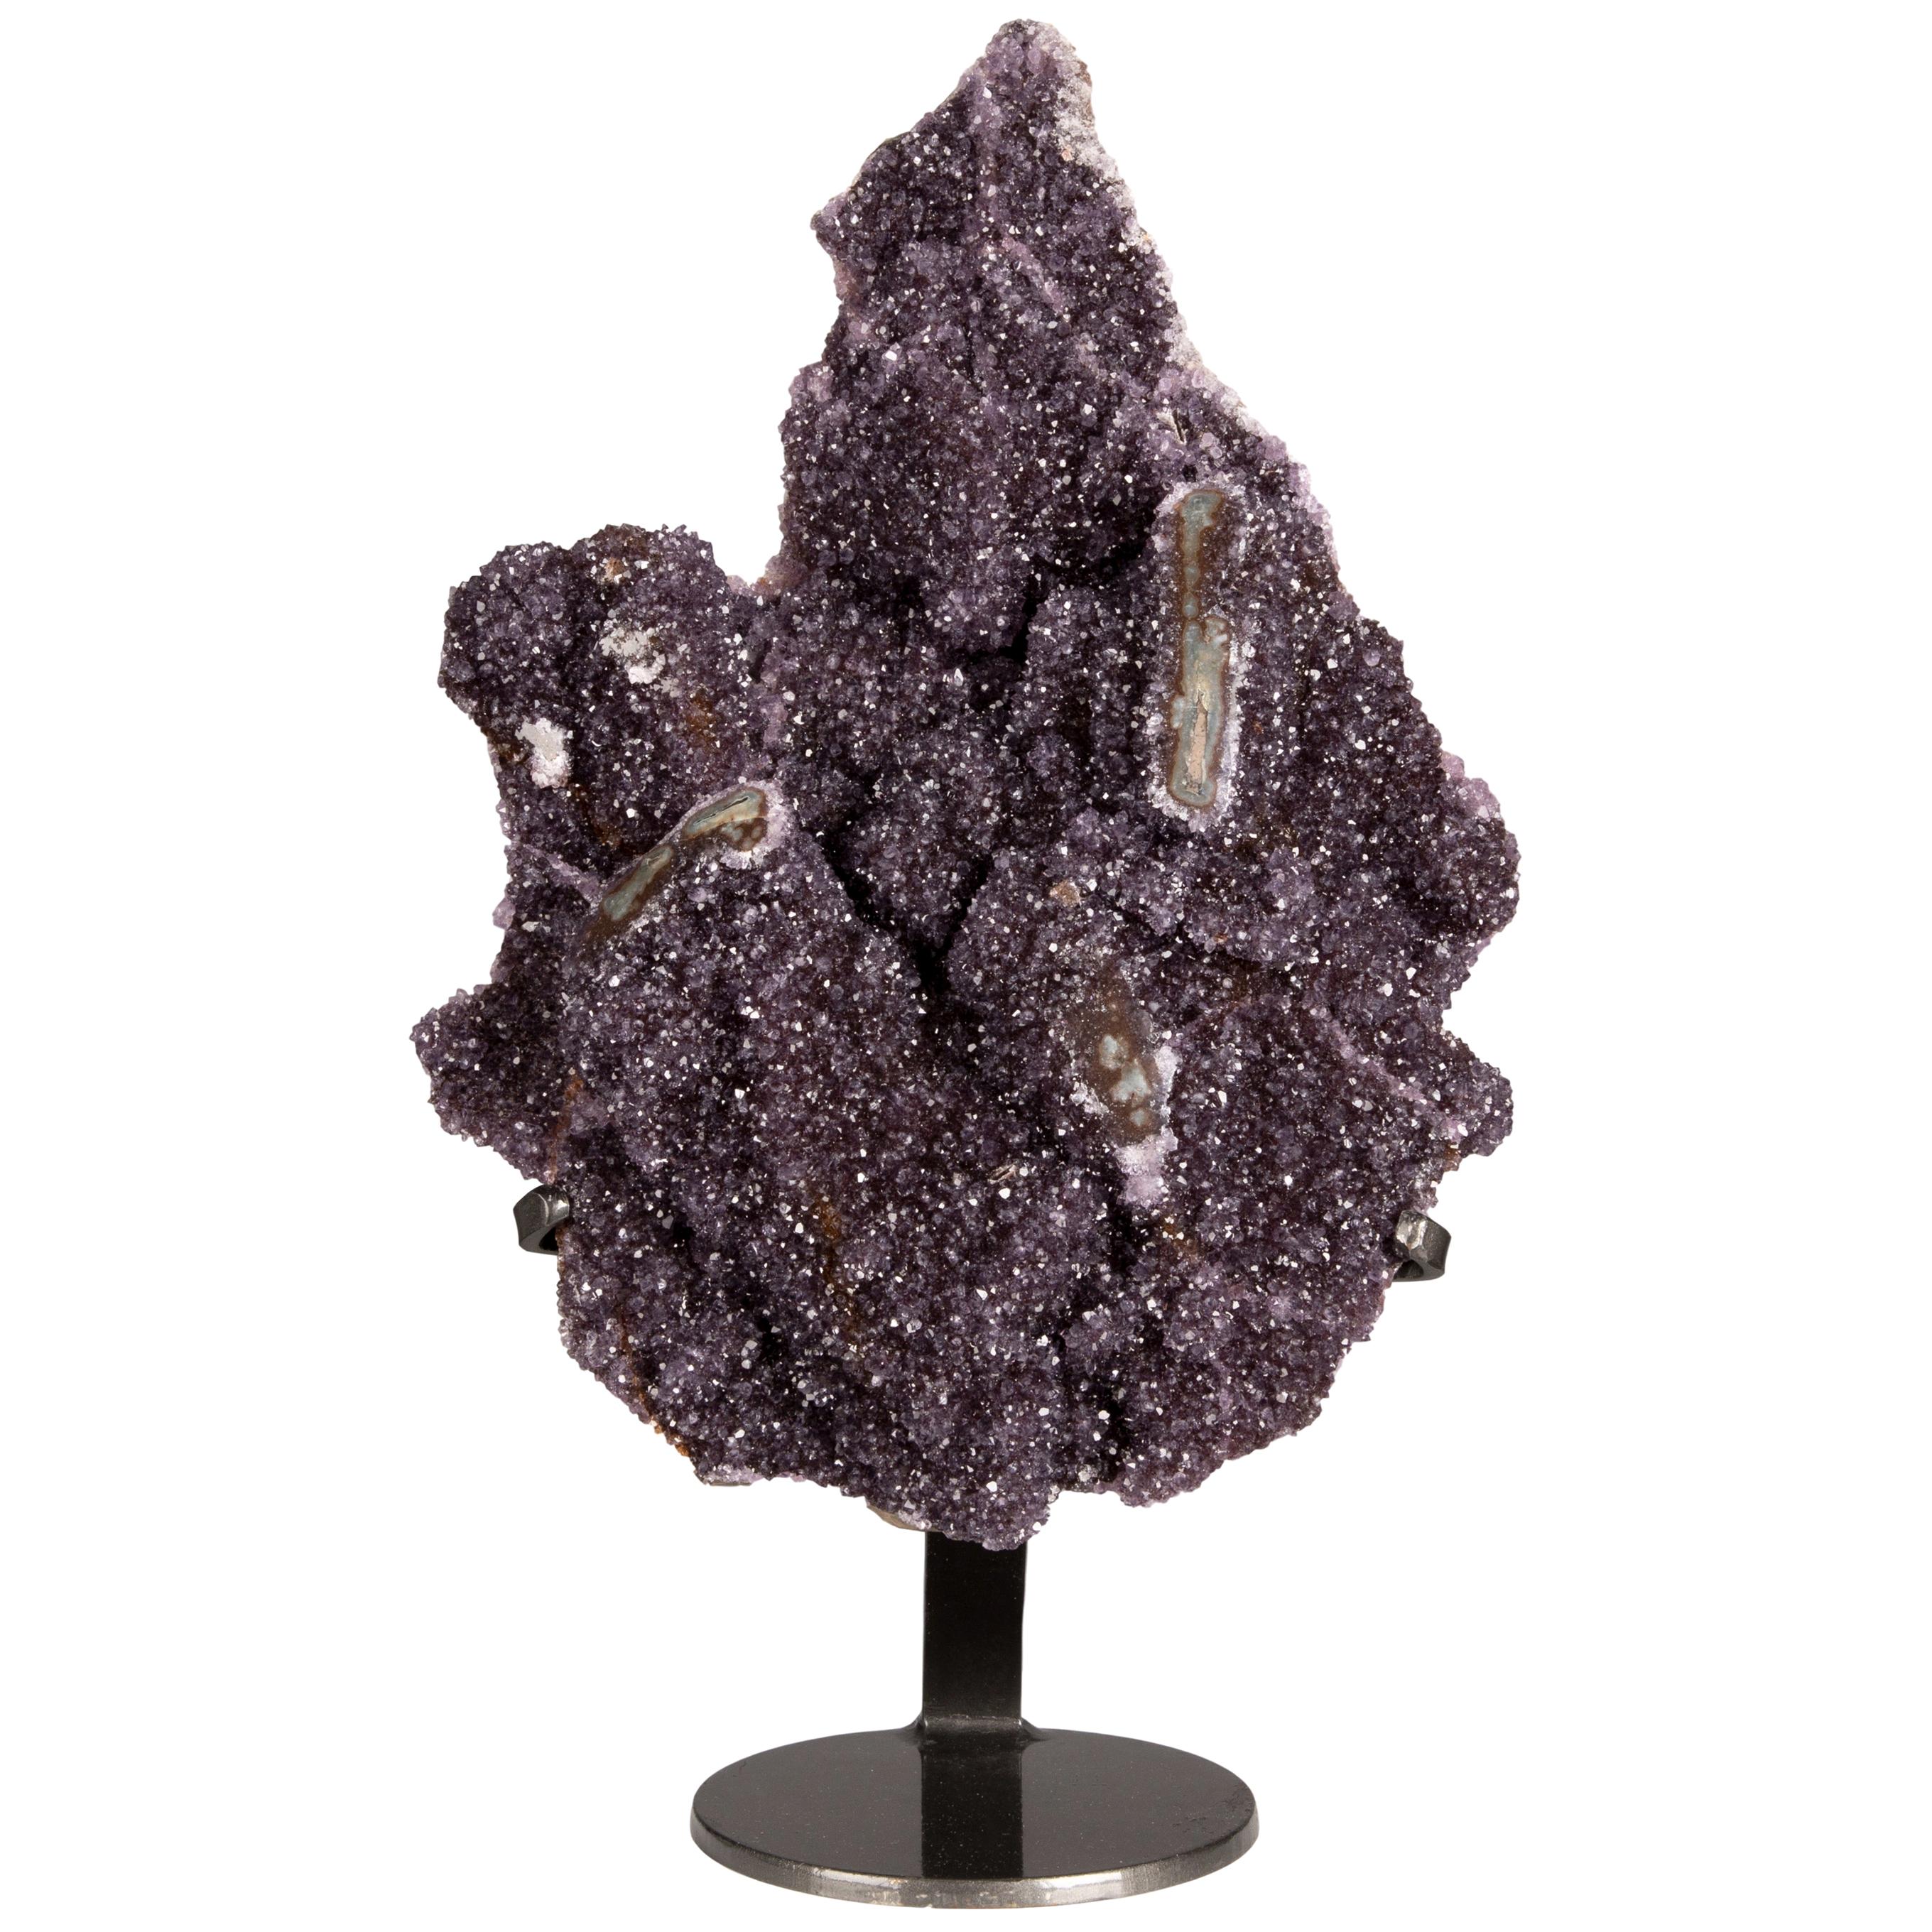 Deep Purple Beautifully Shaped Amethyst Cluster with Stalactites on Metal Stand